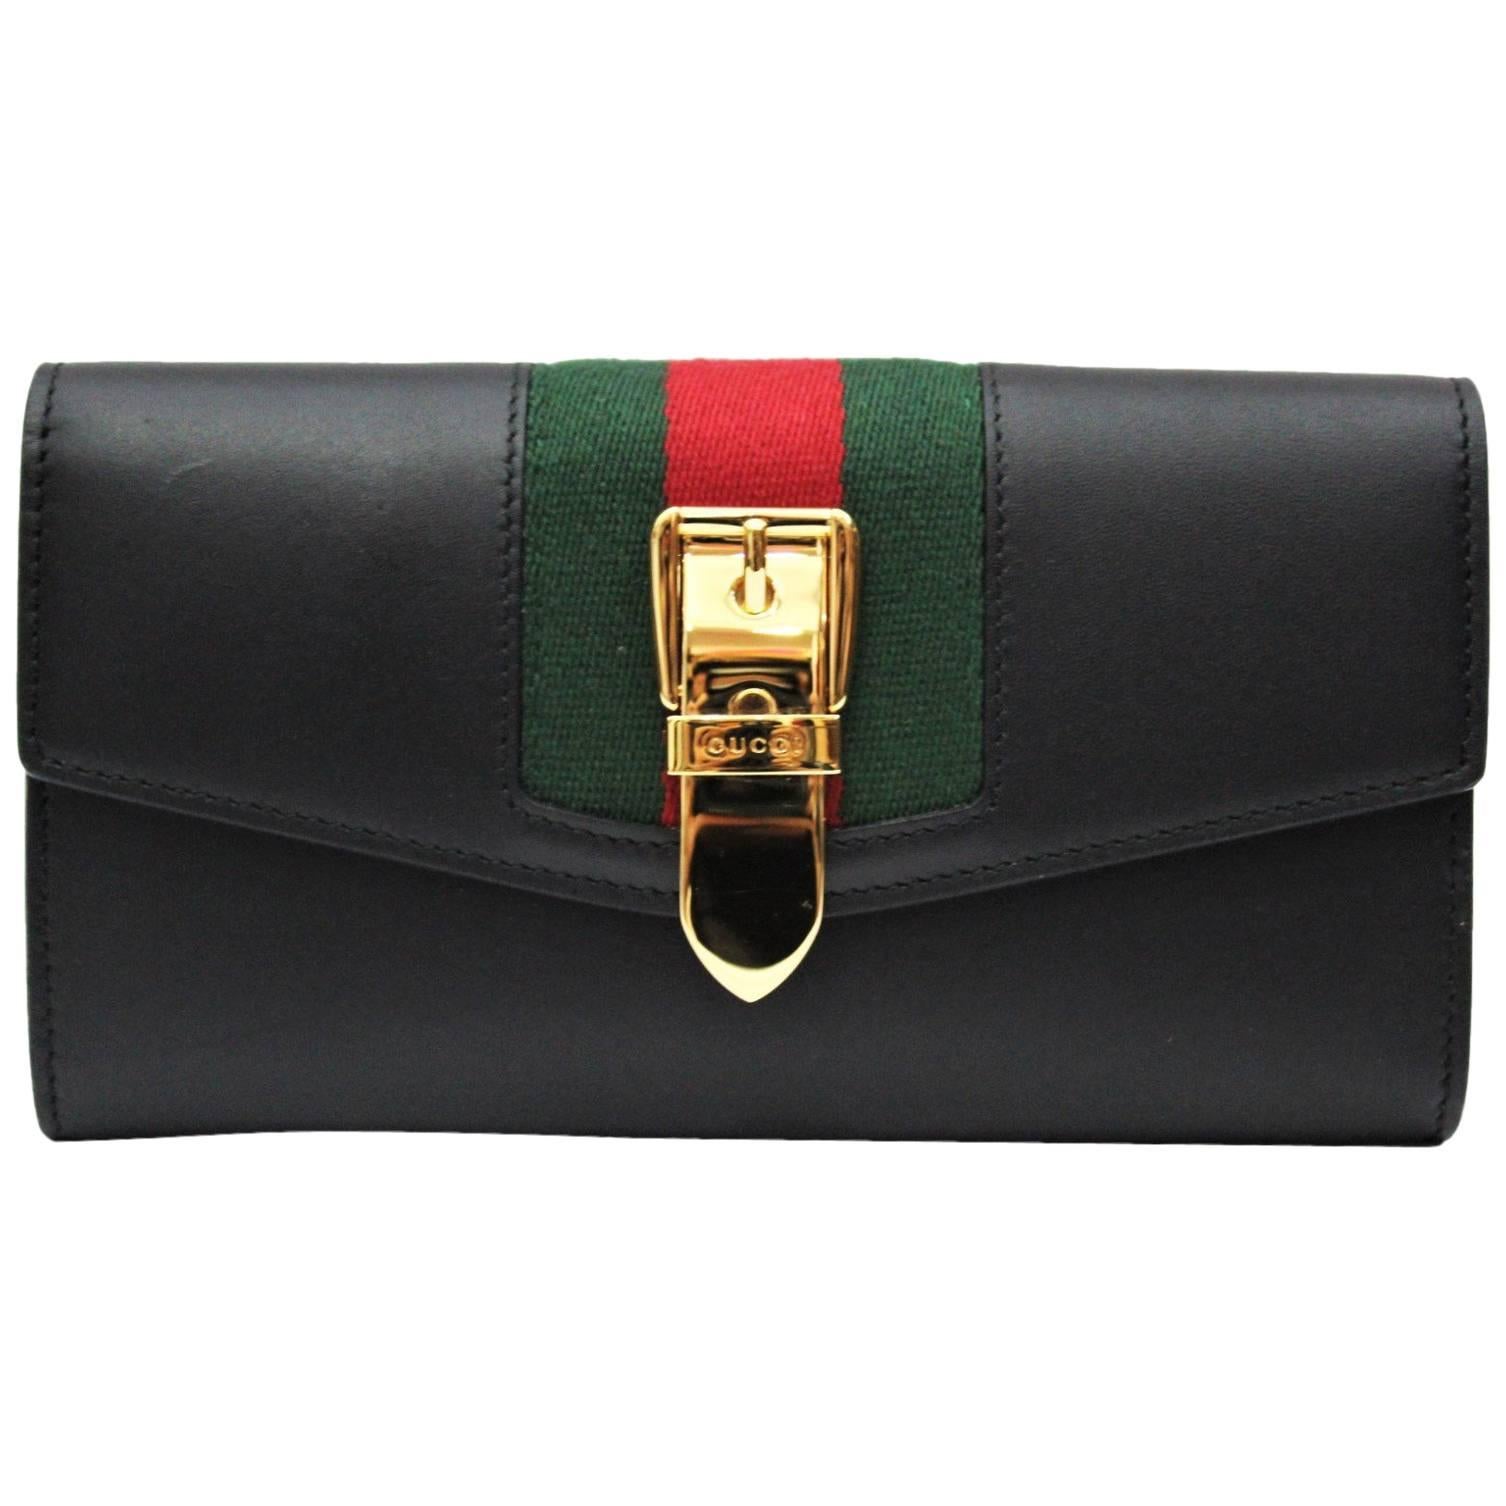 Gucci Sylvie Black Leather Continental Wallet